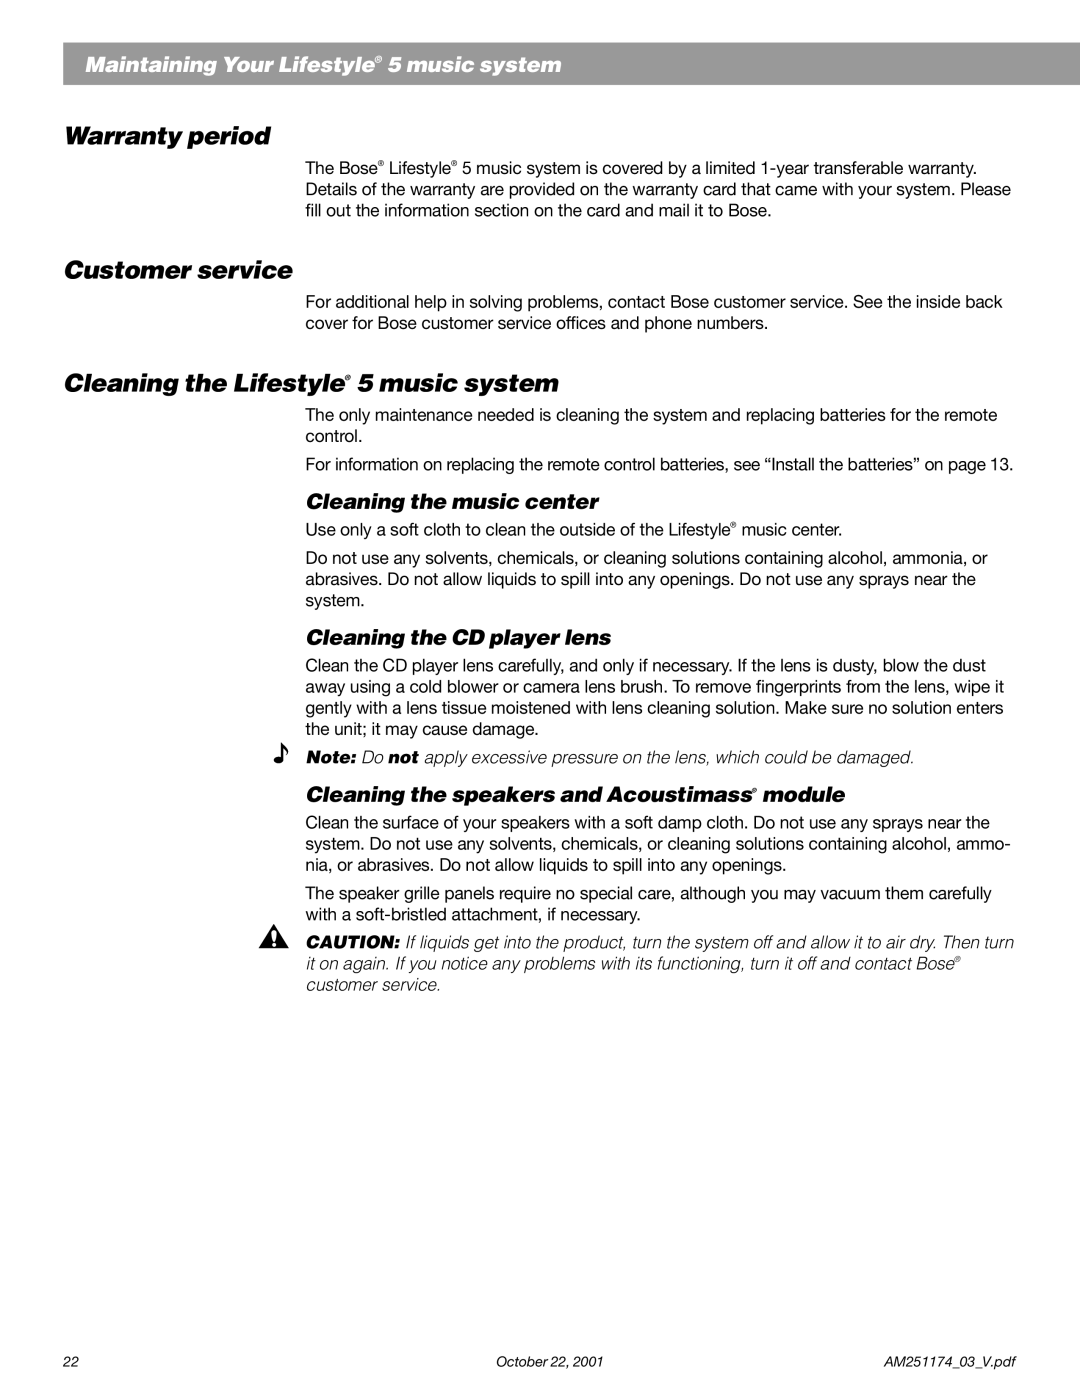 Bose manual Warranty period, Customer service, Cleaning the Lifestyle 5 music system, Cleaning the music center 